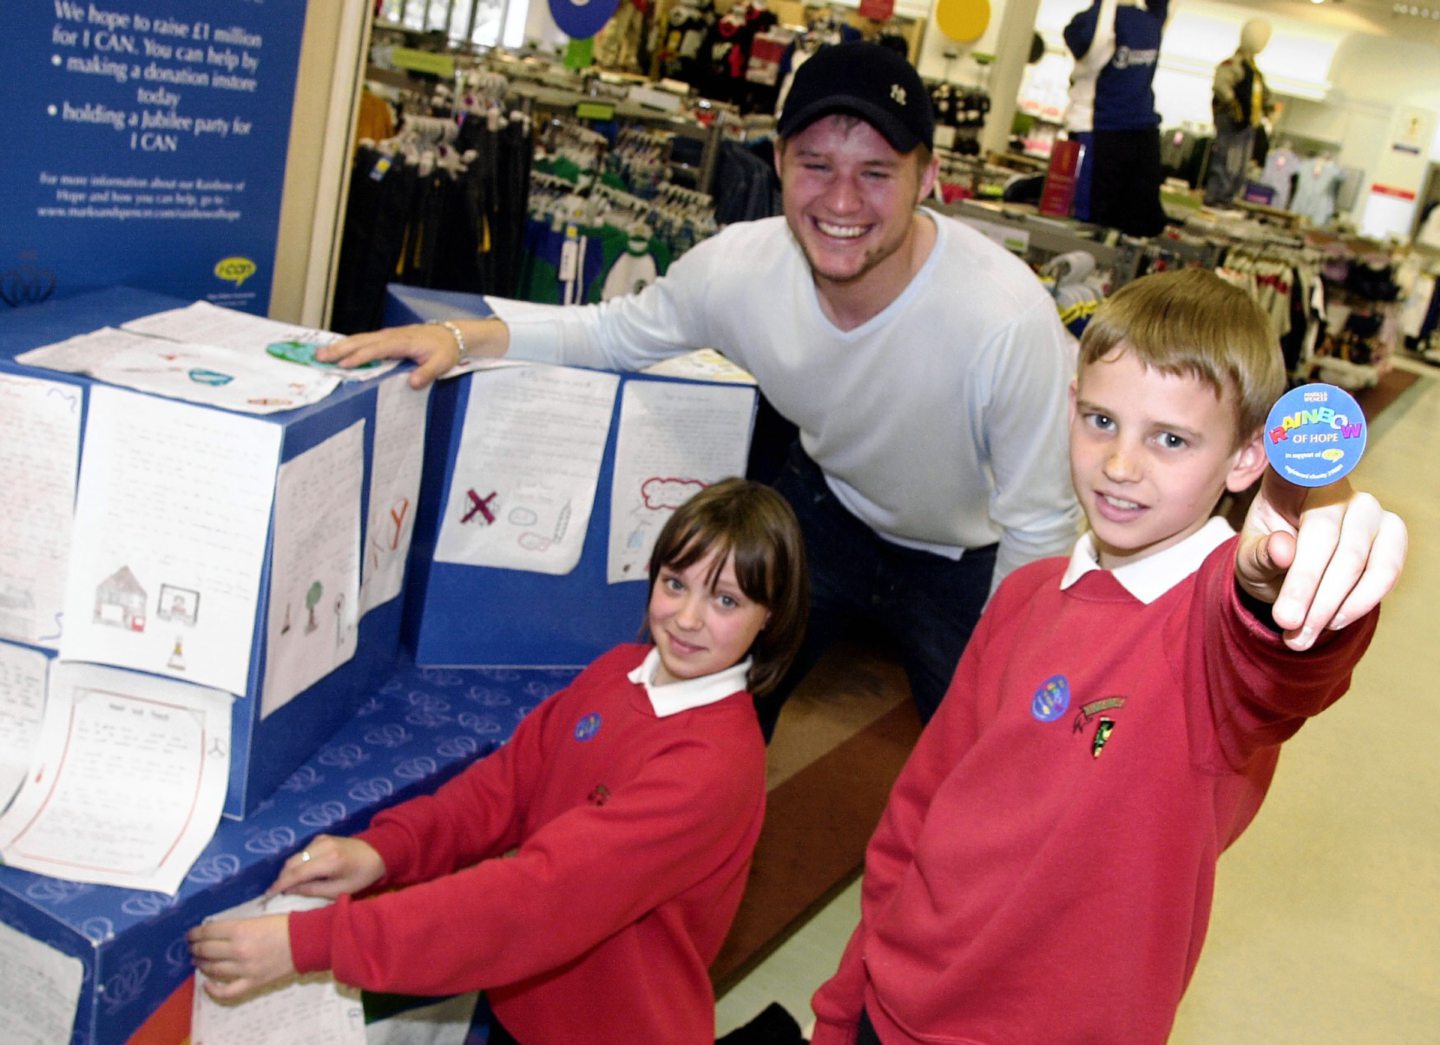 Aberdeen FC player Kevin Rutkiewicz and two school pupils in front of a stall display